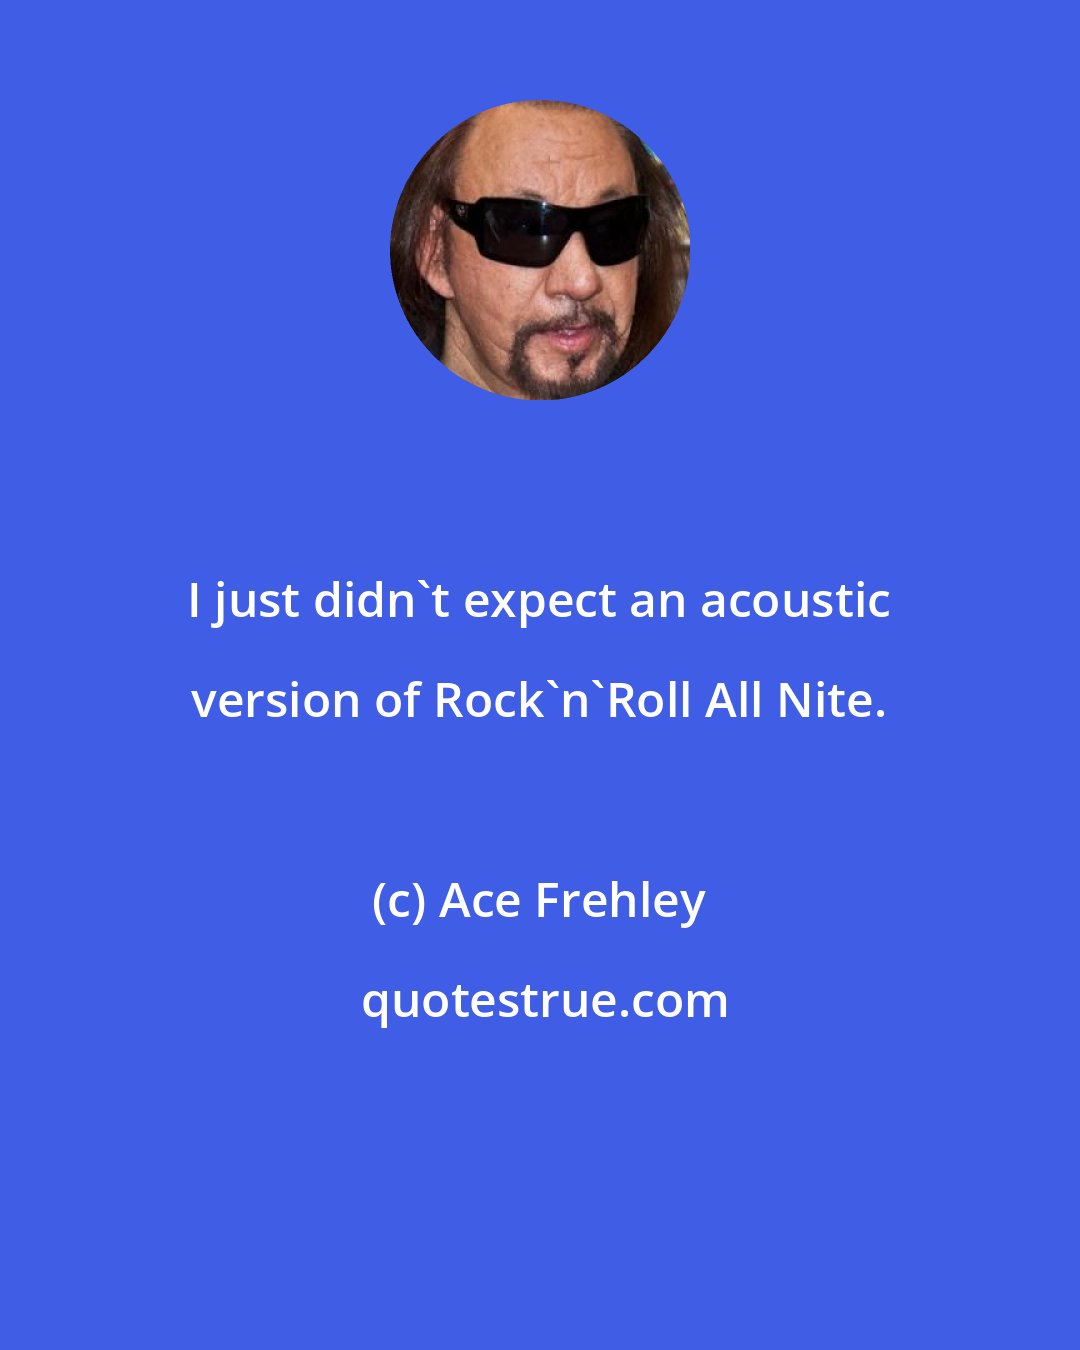 Ace Frehley: I just didn't expect an acoustic version of Rock'n'Roll All Nite.